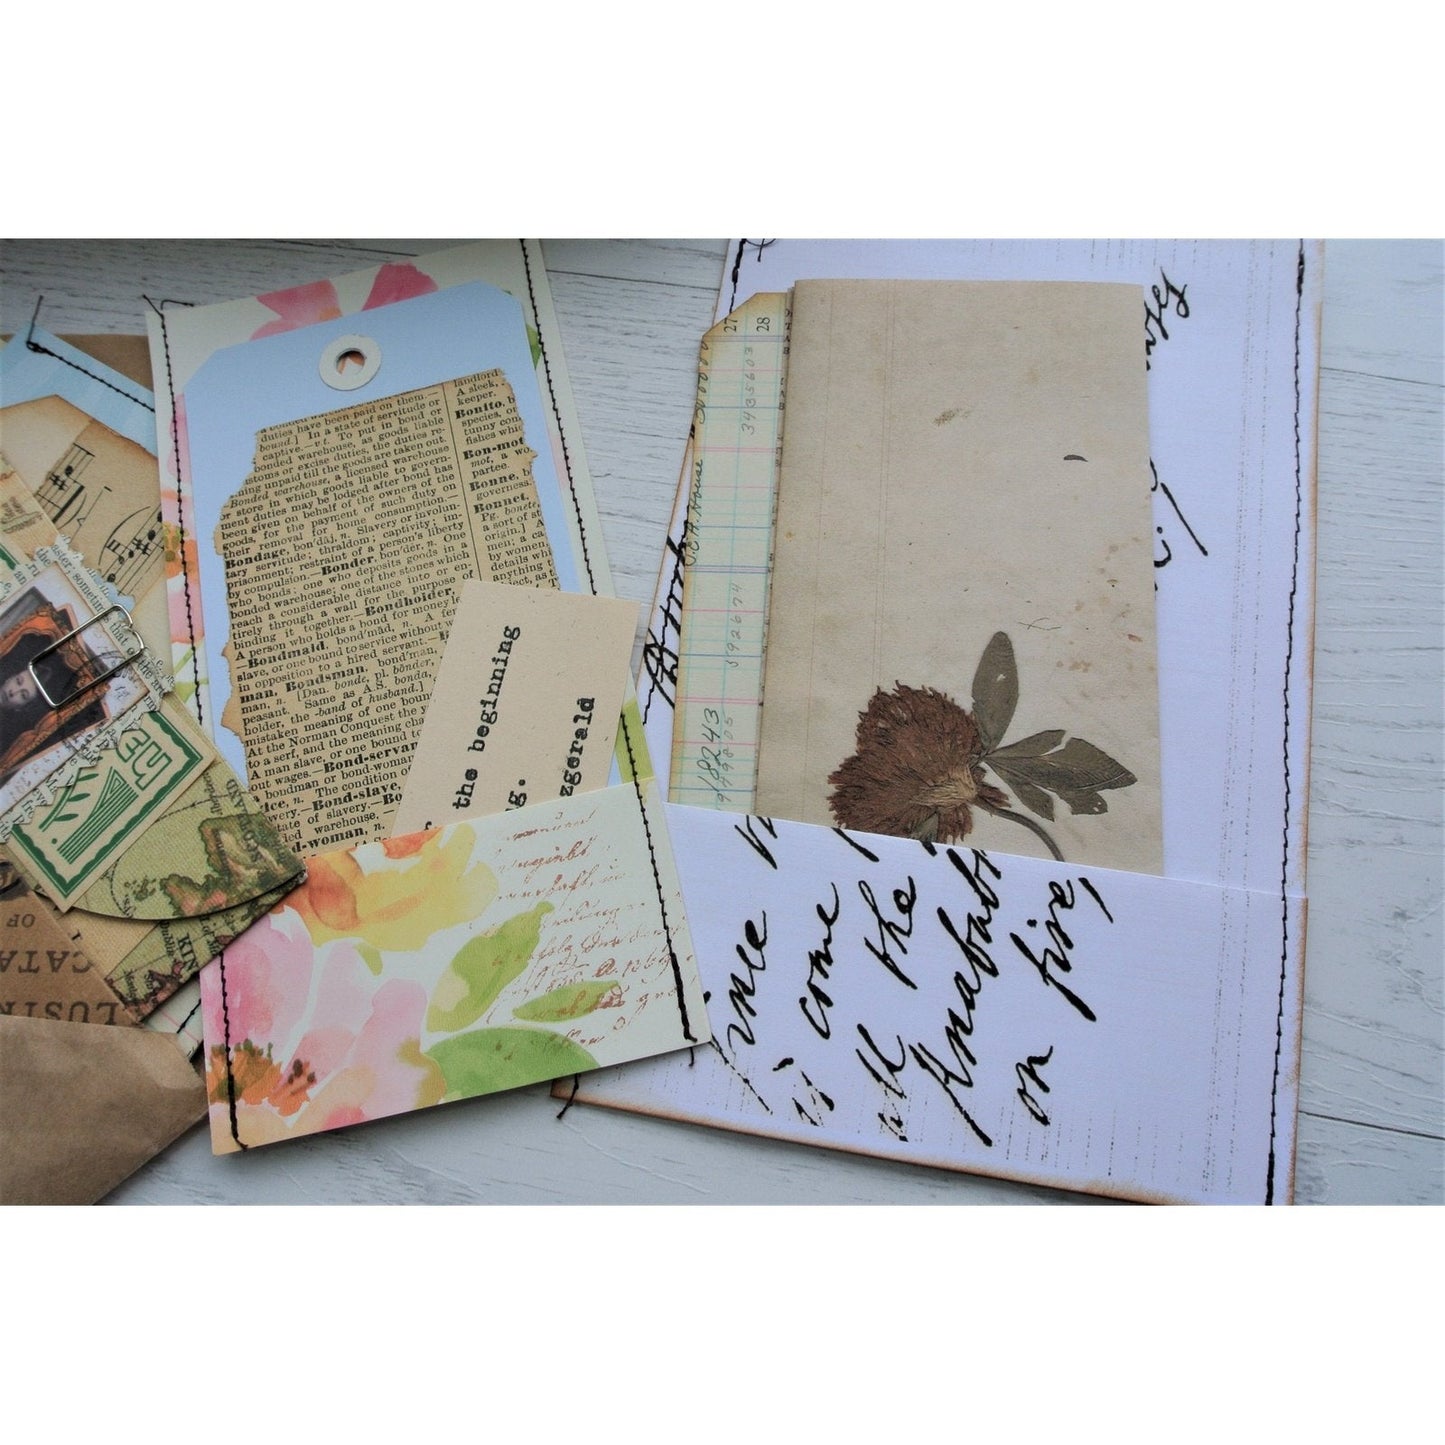 Enveloped Stuffed with Ephemera for Junk Journals - makes a great Happy Mail gift!